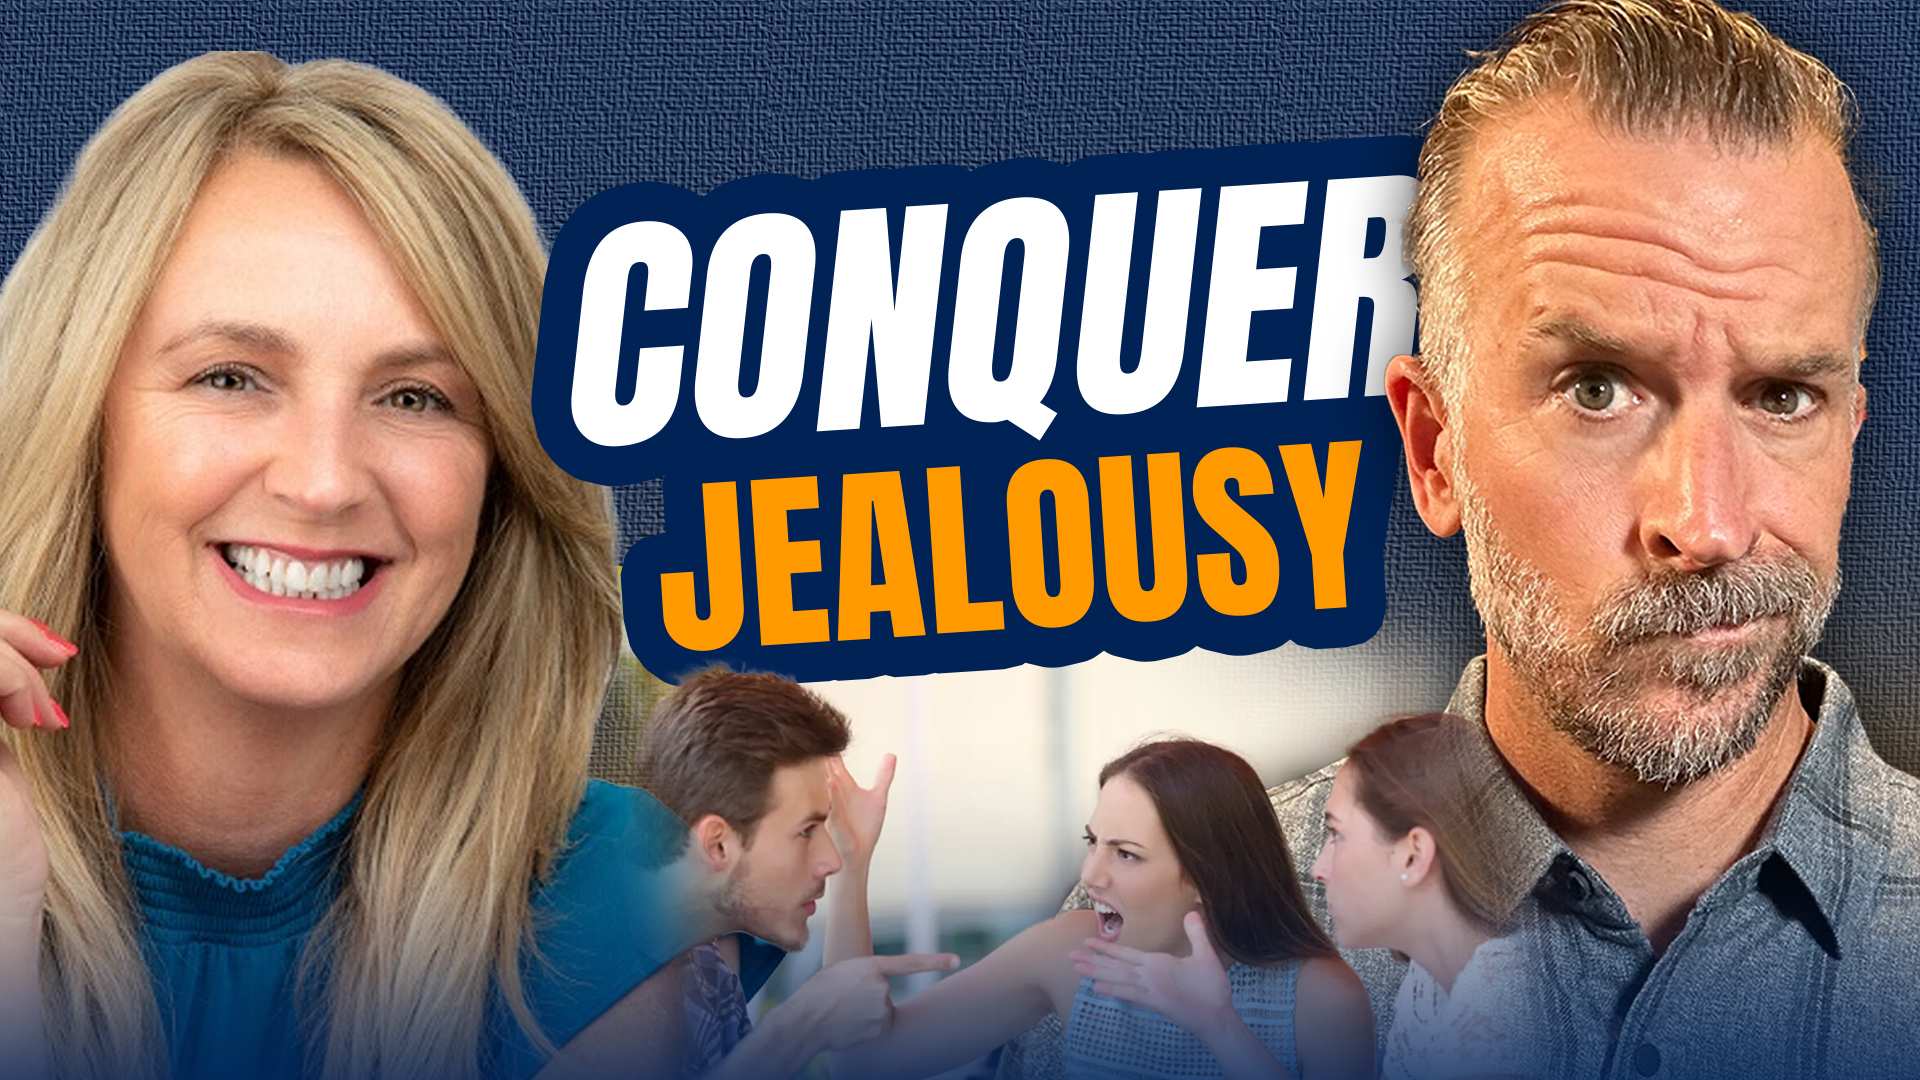 Flow Over Fear: Conquer Jealousy